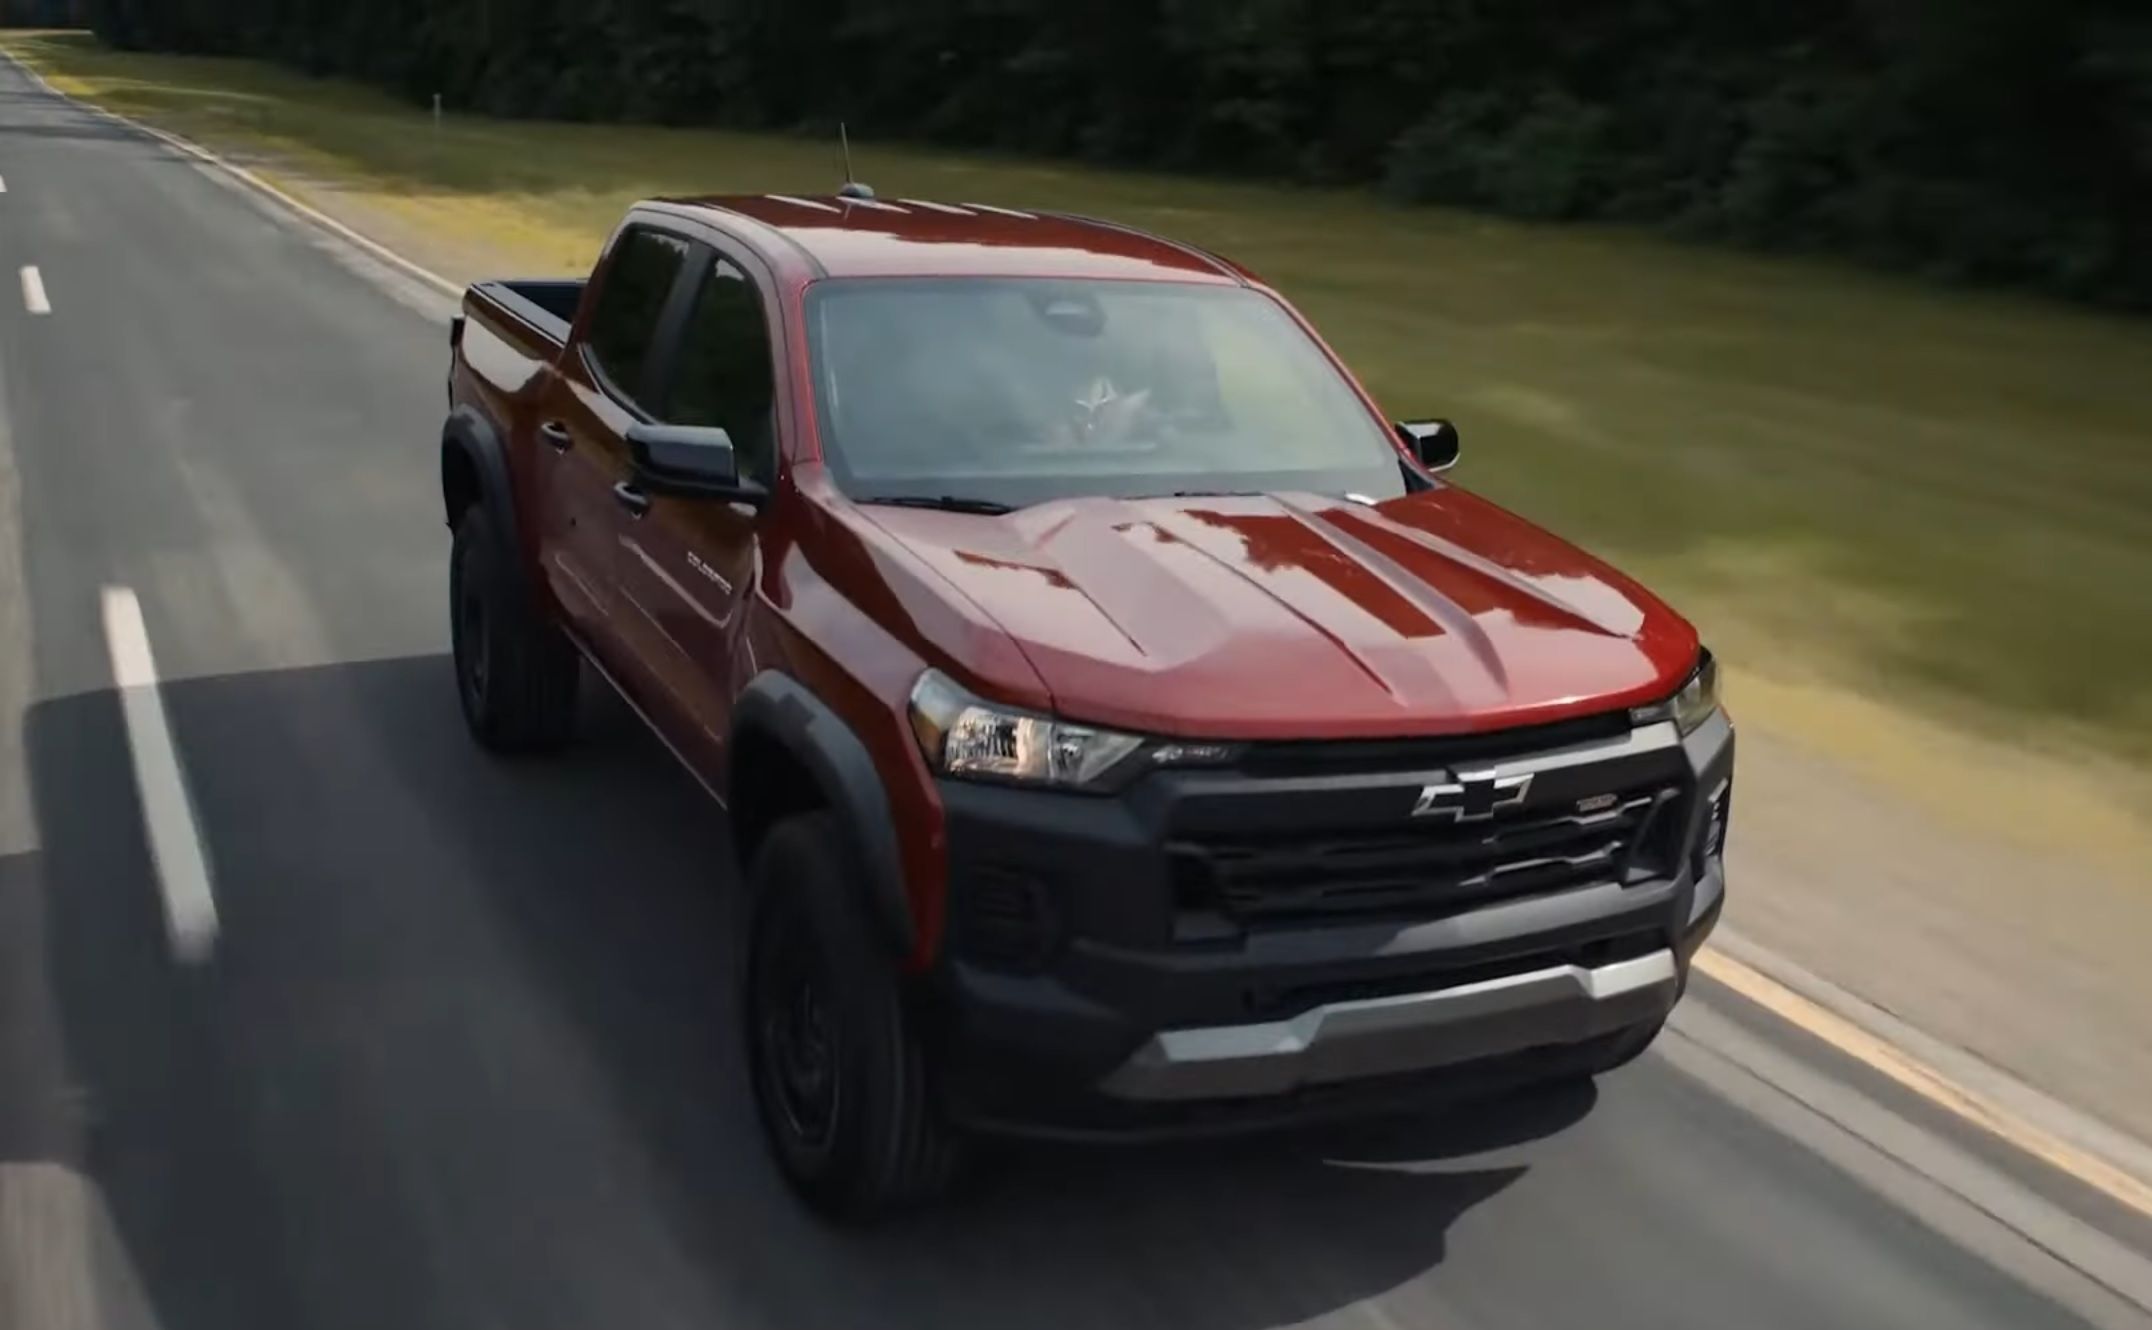 Chevy Colorado Trail Boss On the road